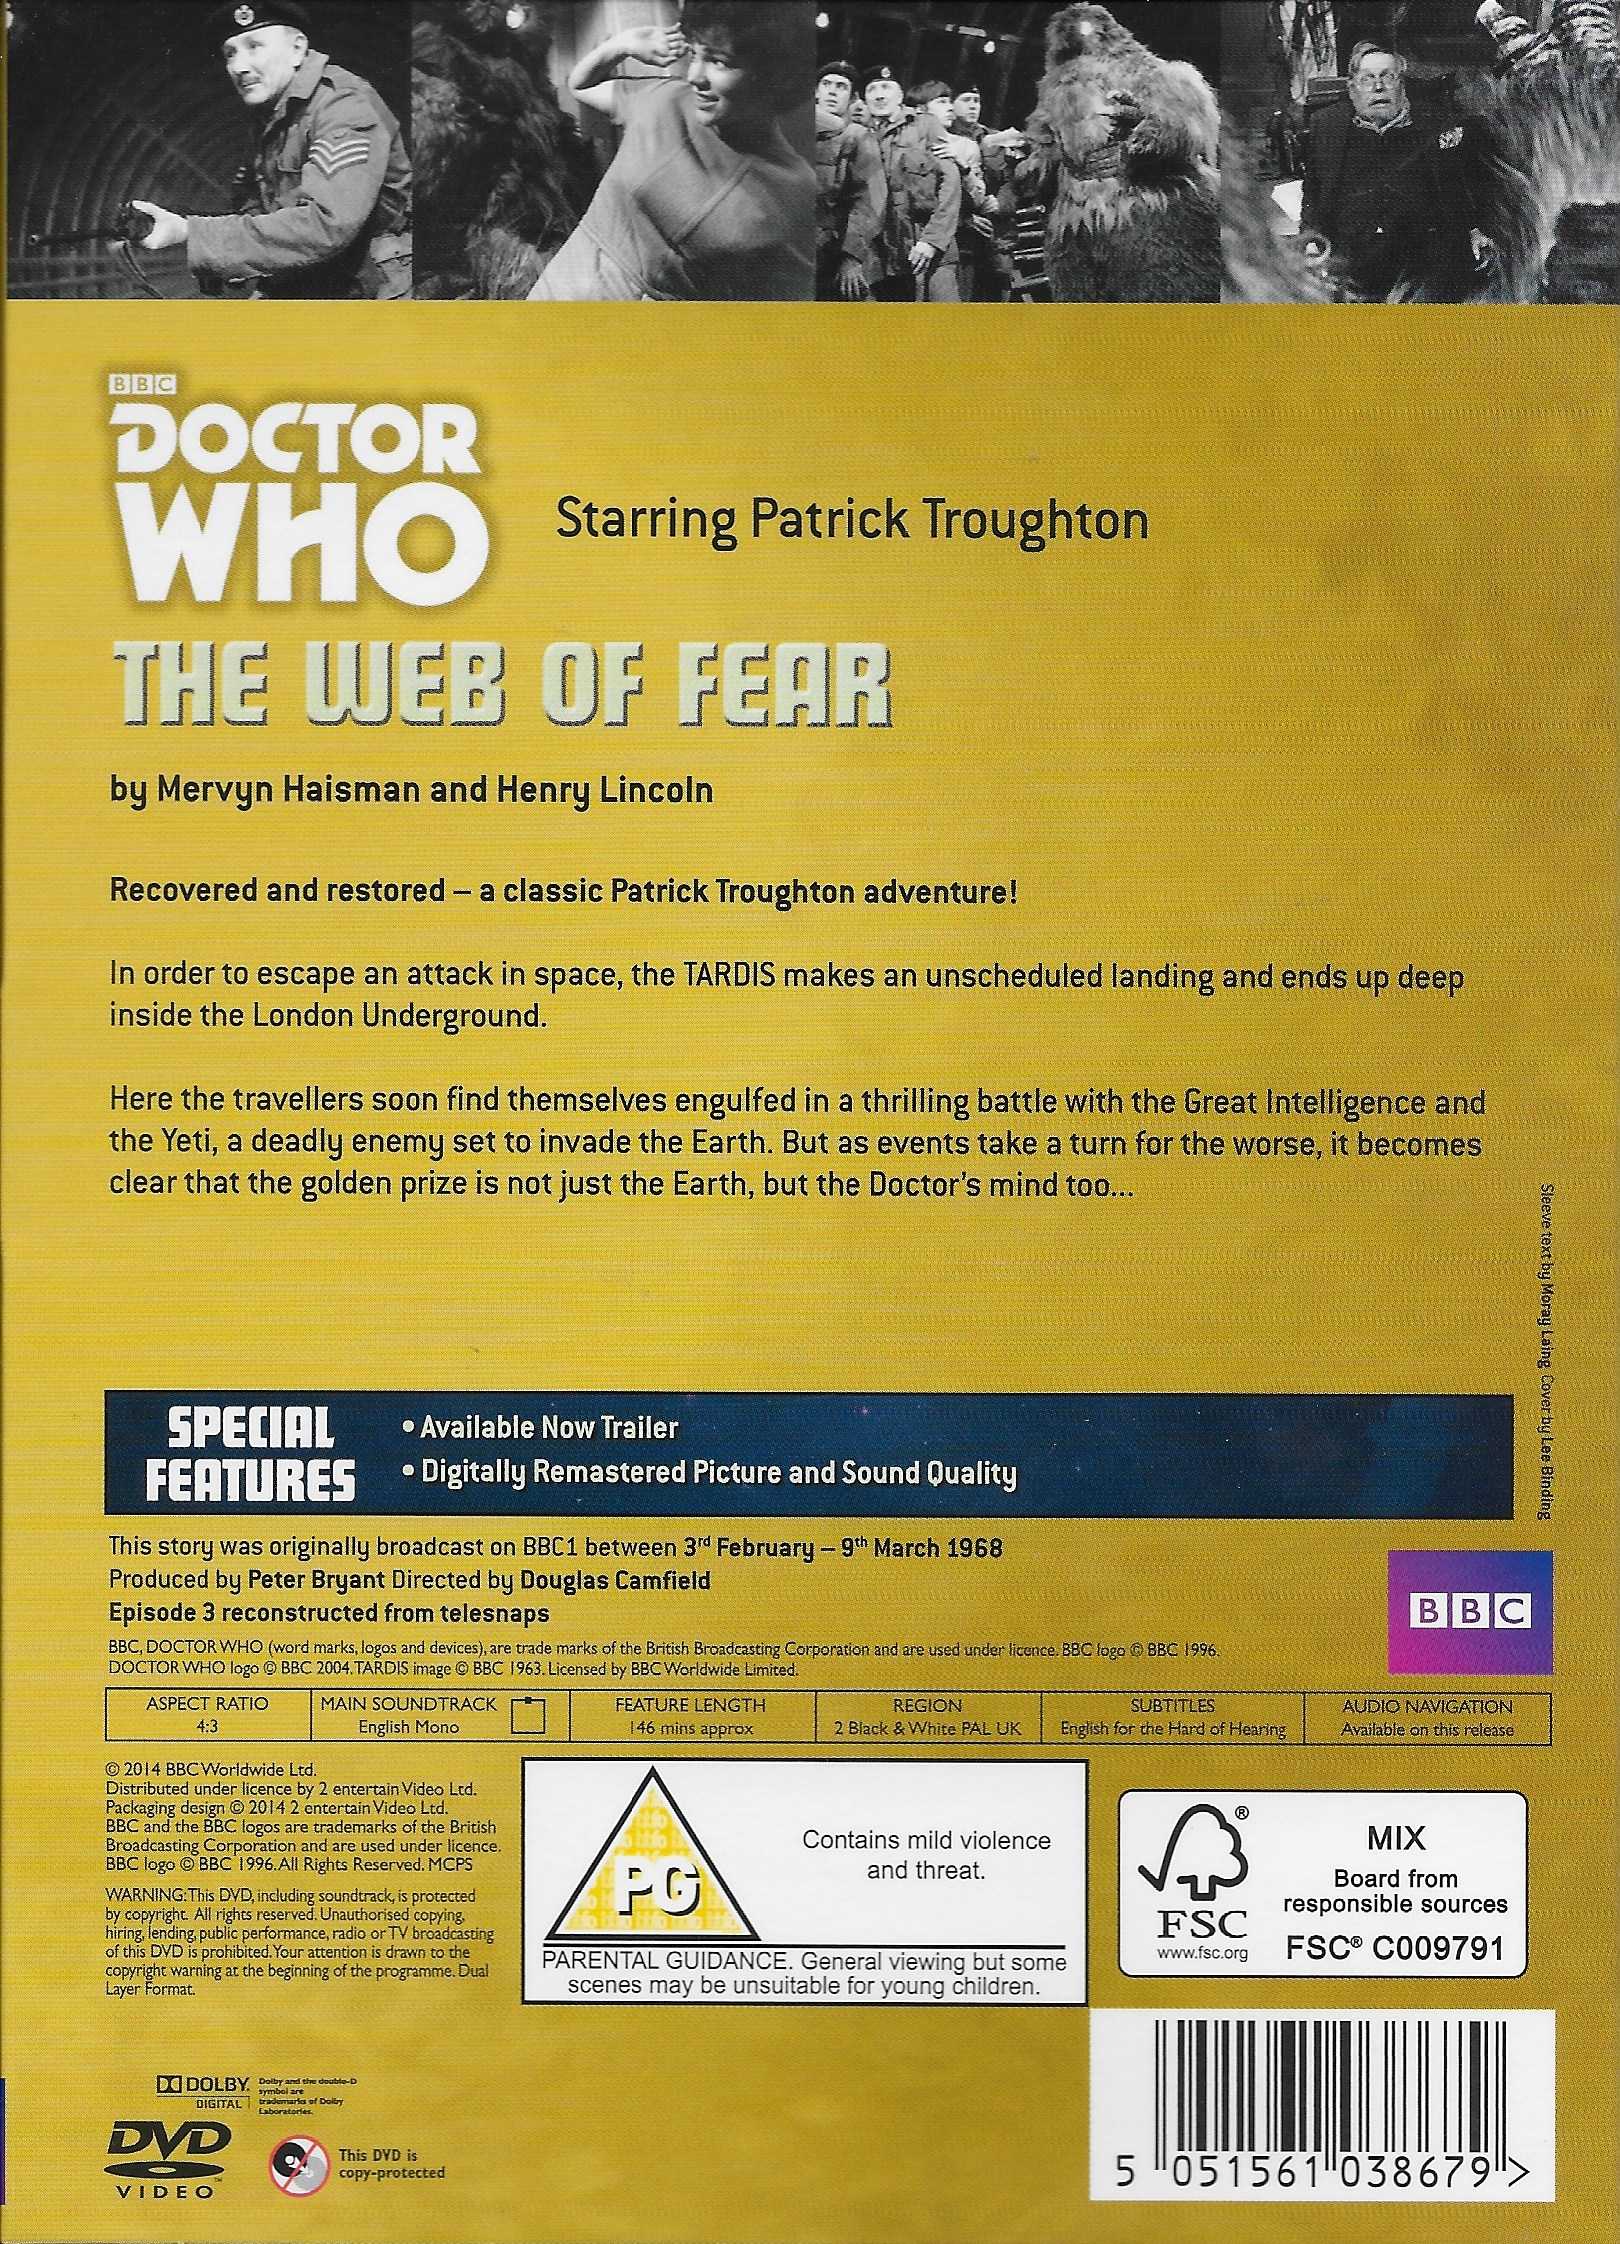 Picture of BBCDVD 3867 Doctor Who - The web of fear by artist Mervyn Haisman / Henry Lincoln from the BBC records and Tapes library